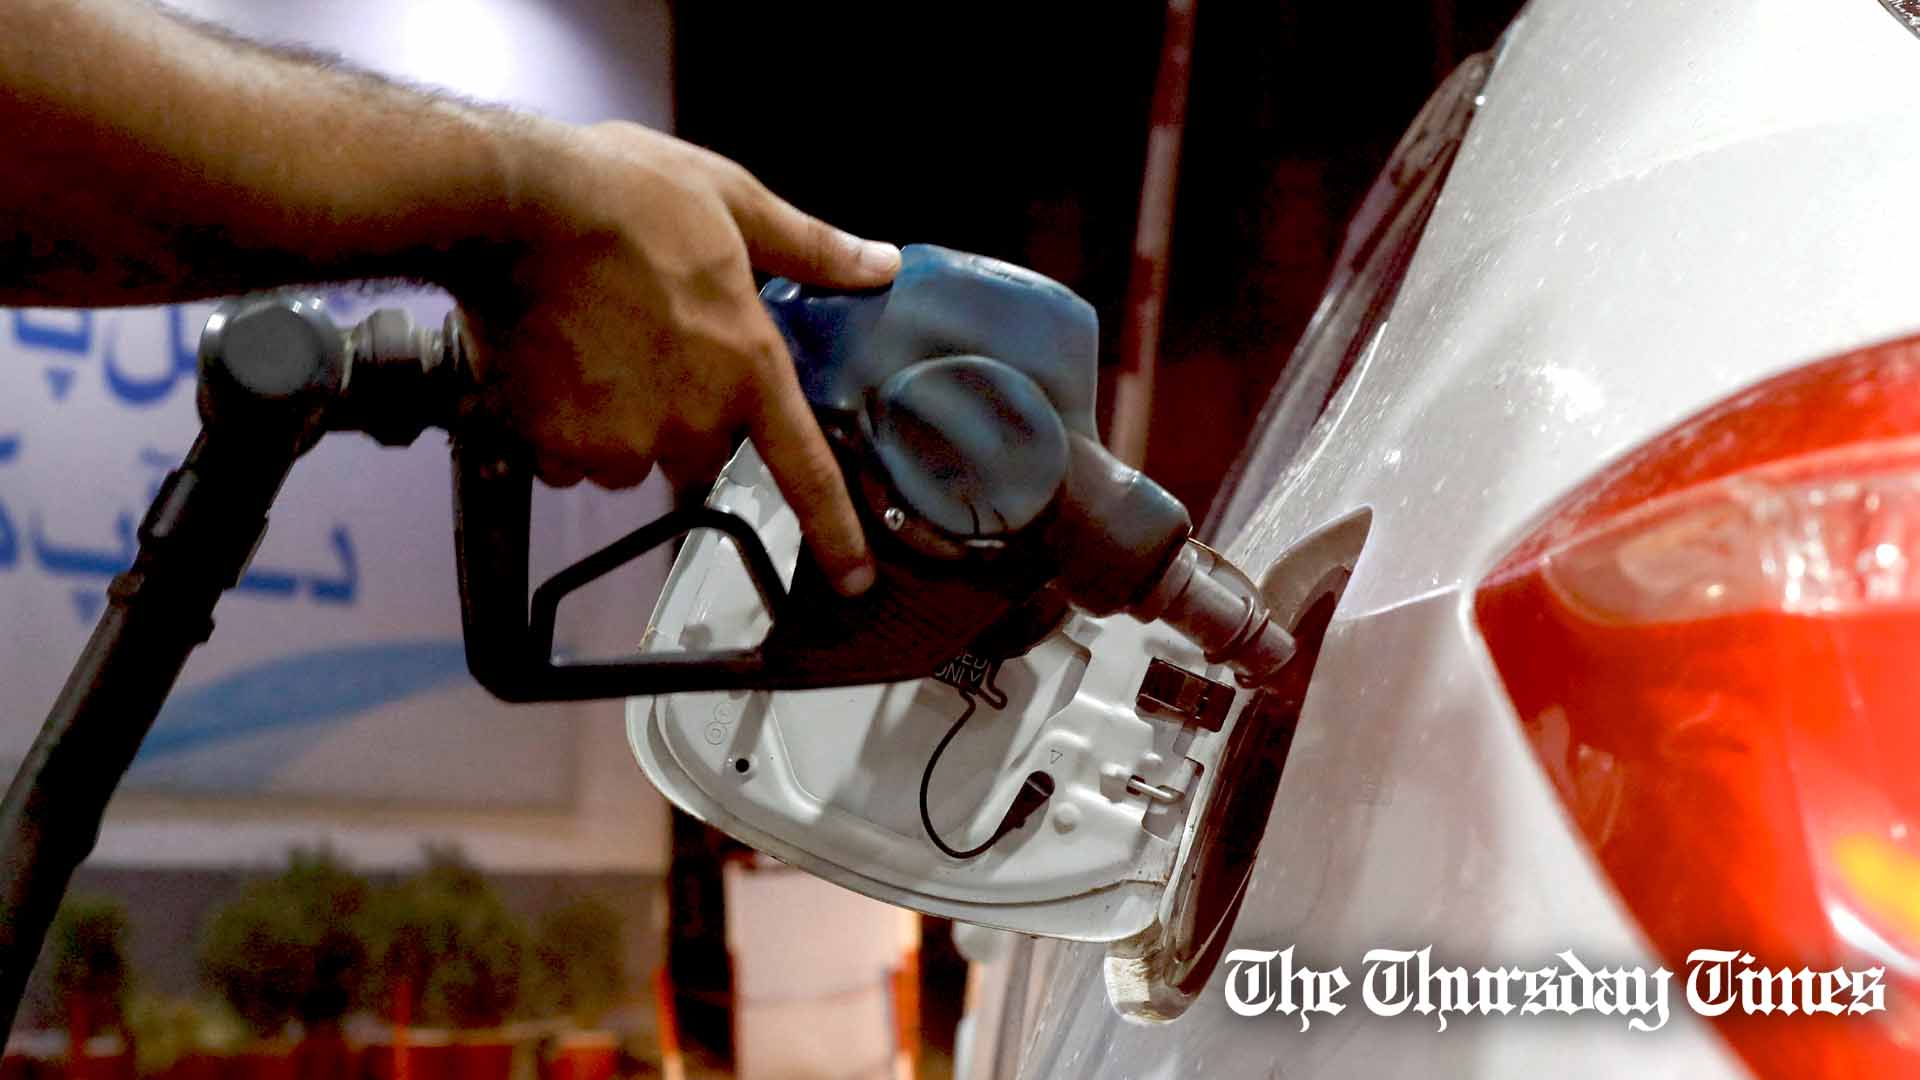 A file photo is shown of petrol being pumped into a vehicle. — FILE/THE THURSDAY TIMES